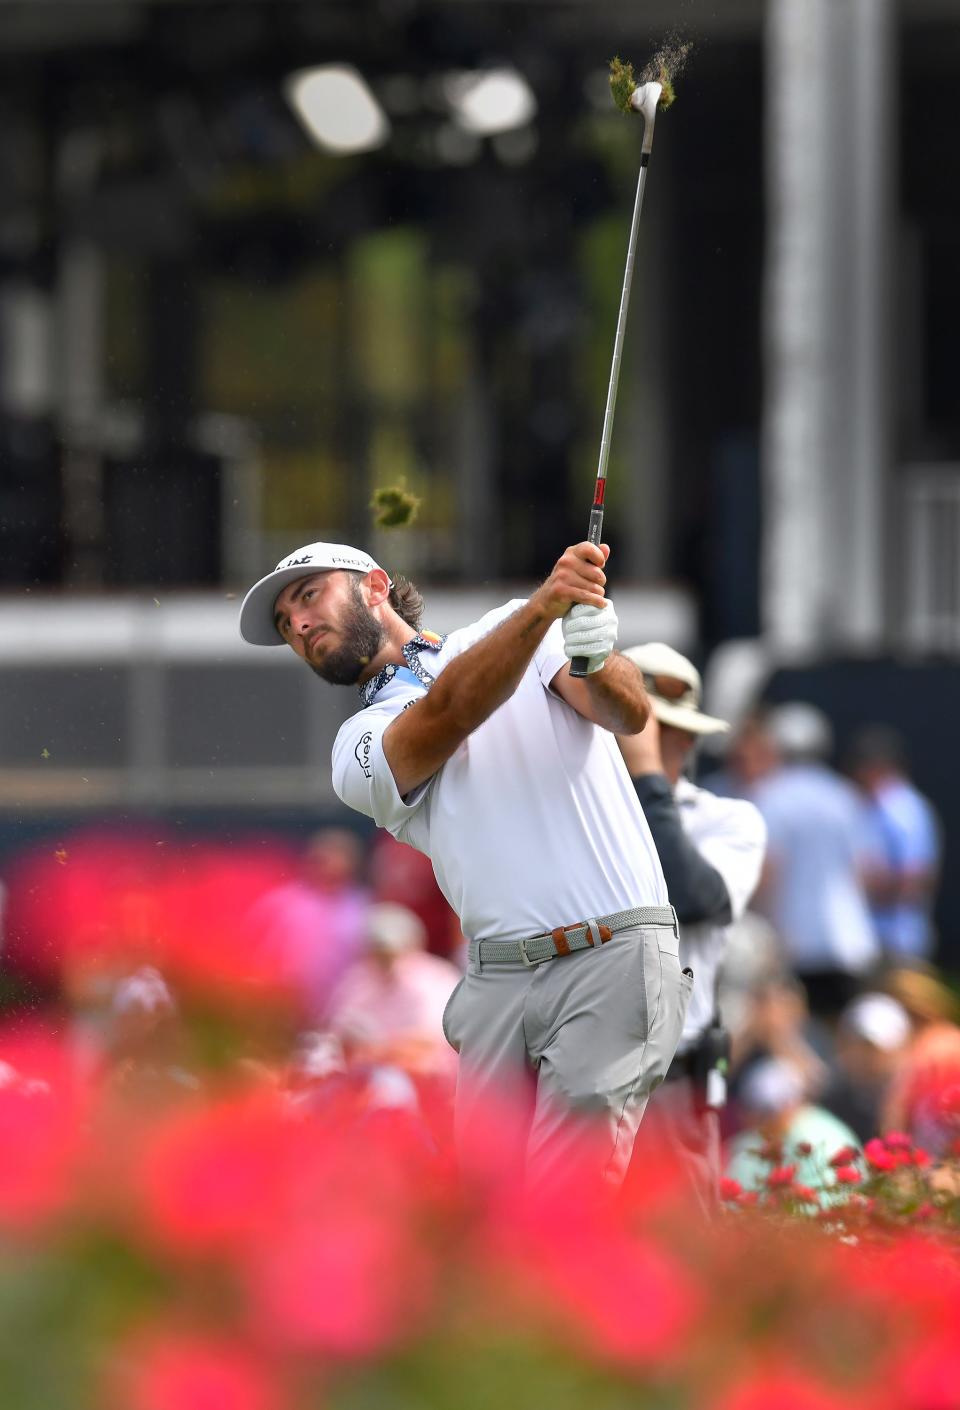 Max Homa tries his second shot to the island hole 17 after putting his first shot in the water during final round action of The Players Championship.